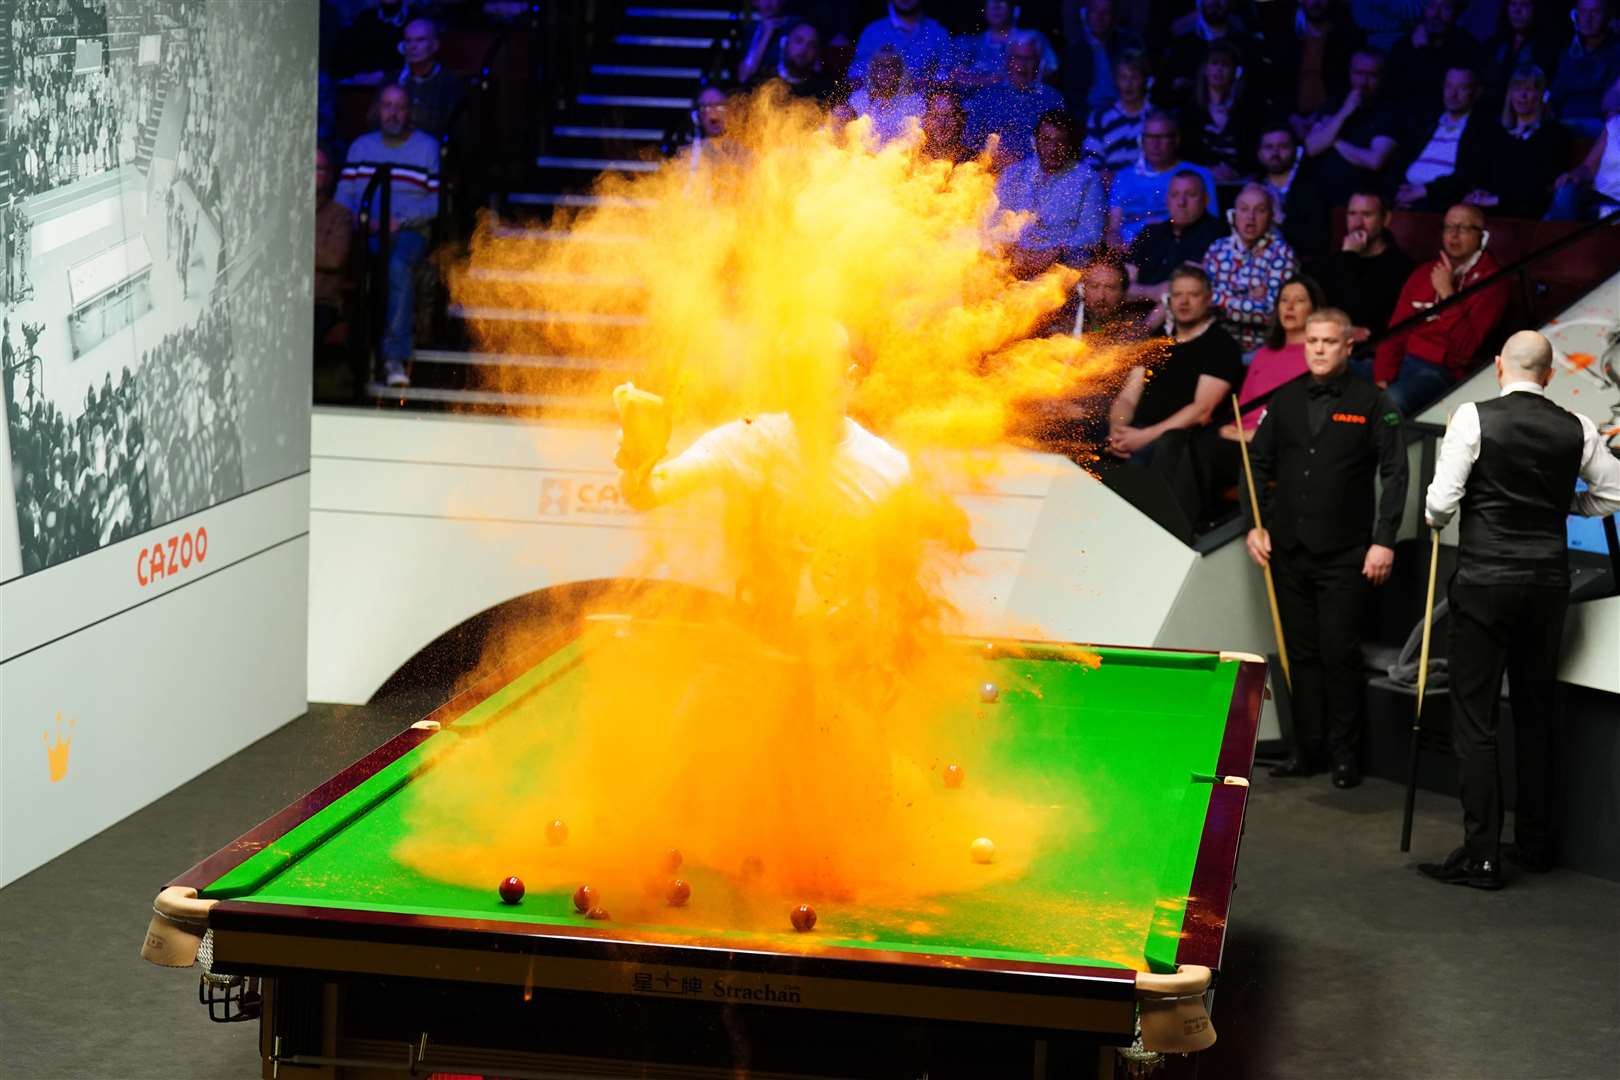 A Just Stop Oil protester throws orange powder at the Crucible in Sheffield (Mike Egerton/PA)